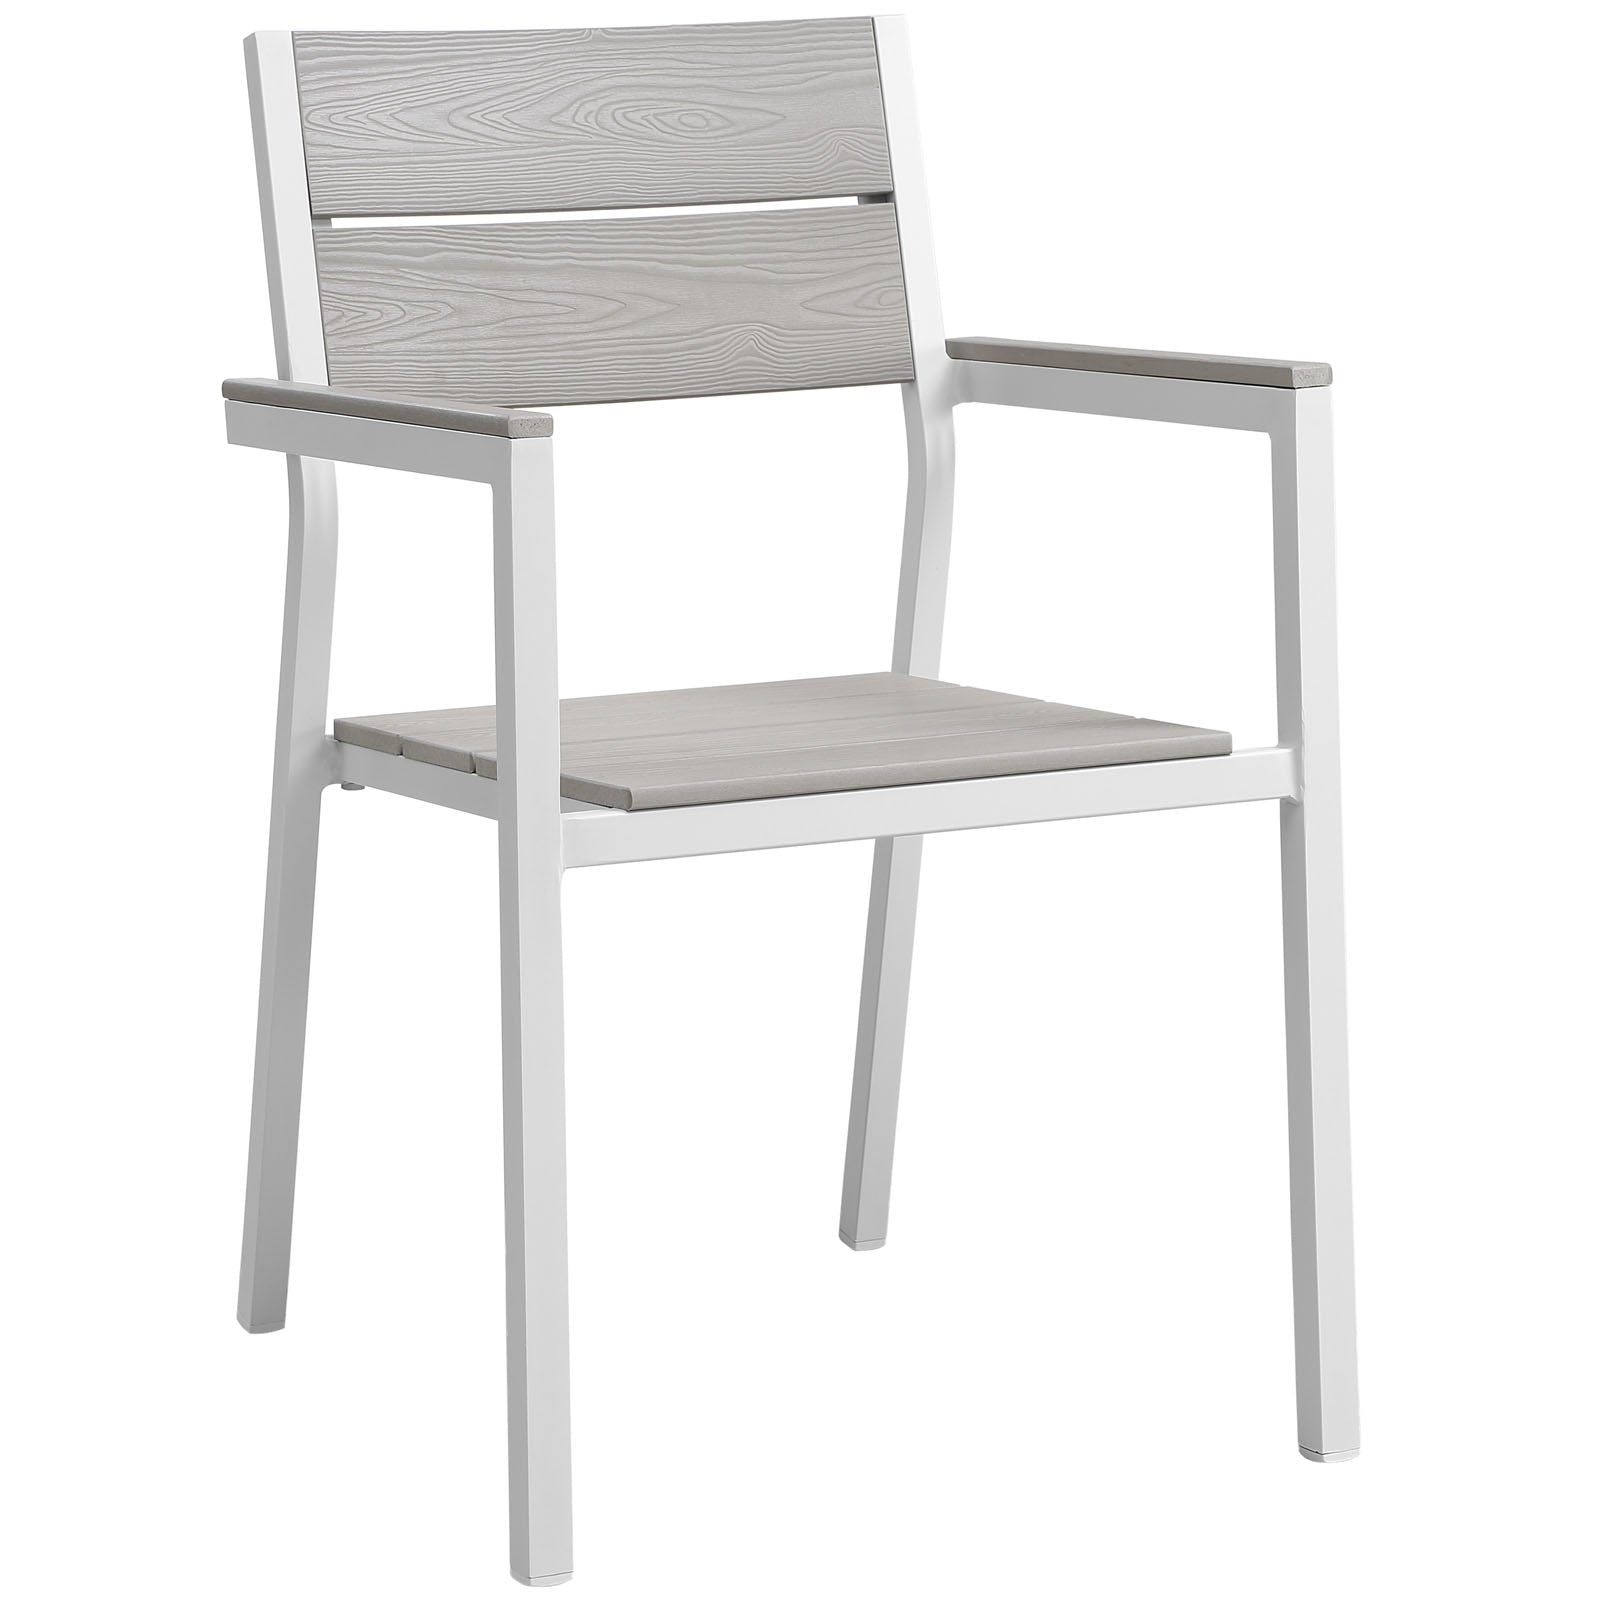 Modway Outdoor Dining Sets - Maine Outdoor Dining Set for 8 White & Light Gray